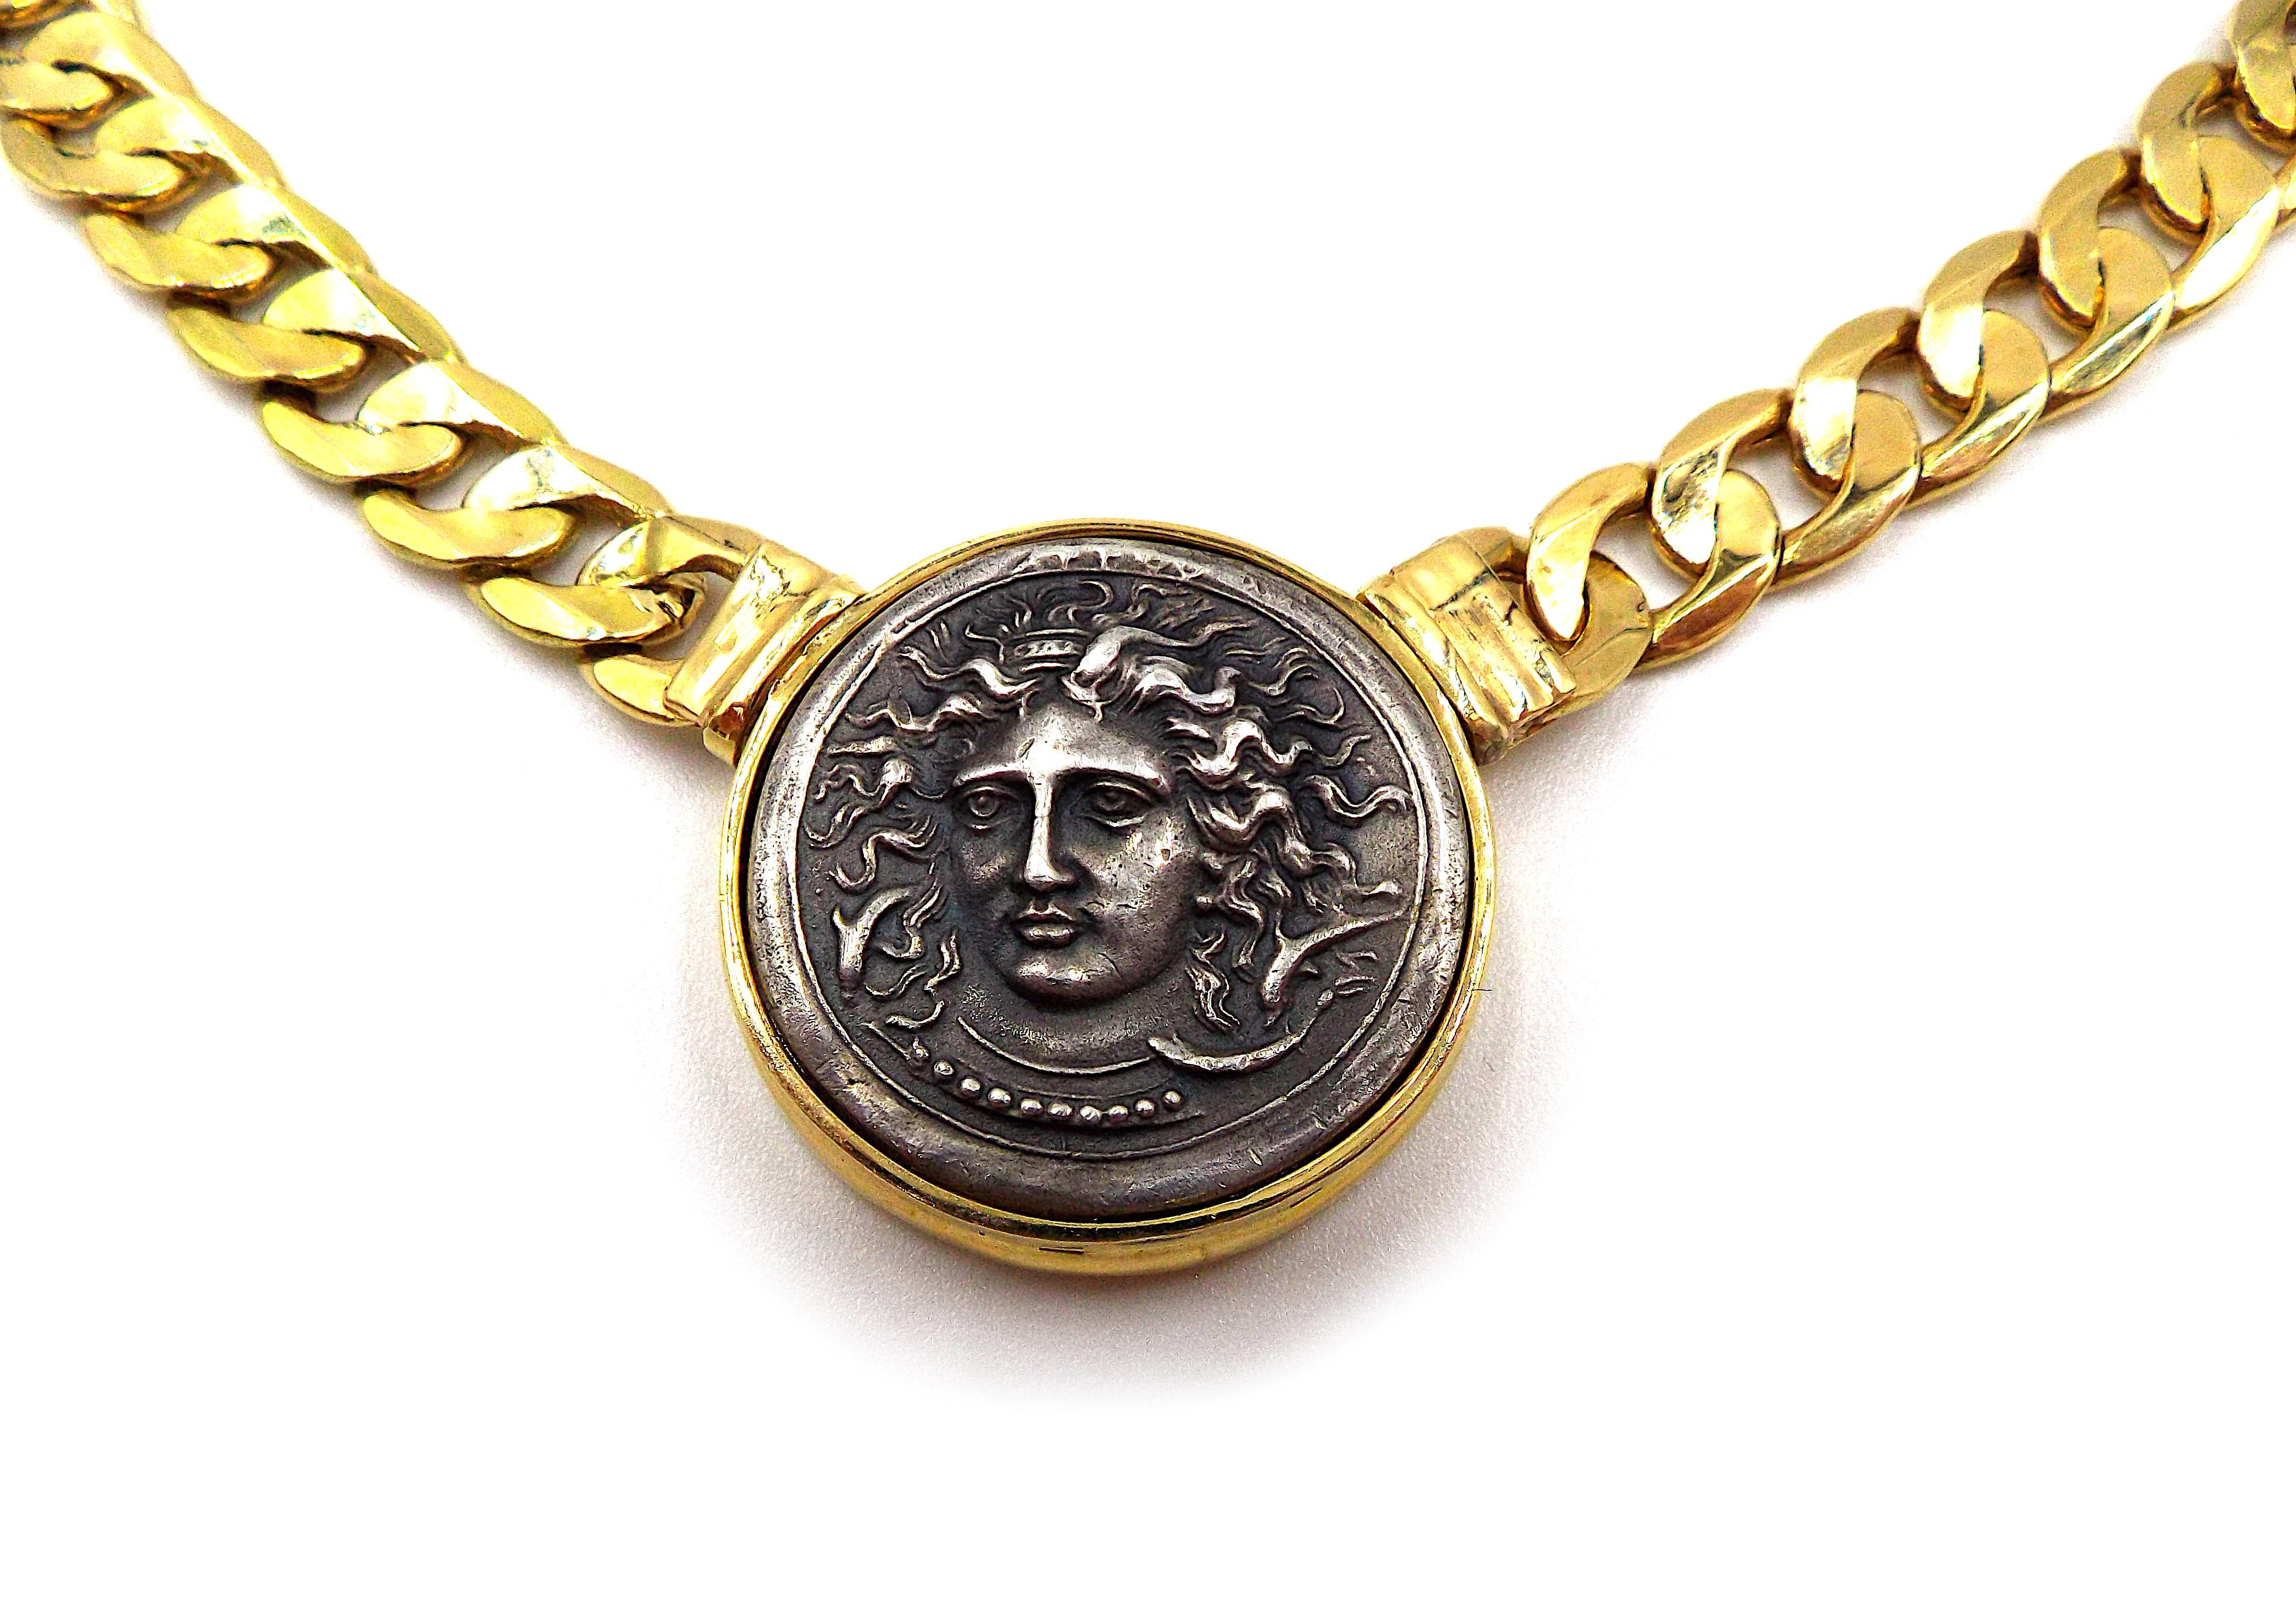 A vintage gold necklace featuring an ancient silver coin. With Italian registry marks, stamped 750. The necklace length is approximately 16.5 inches. Coin diameter is approximately 1 inch. Weight is 53.5 grams.